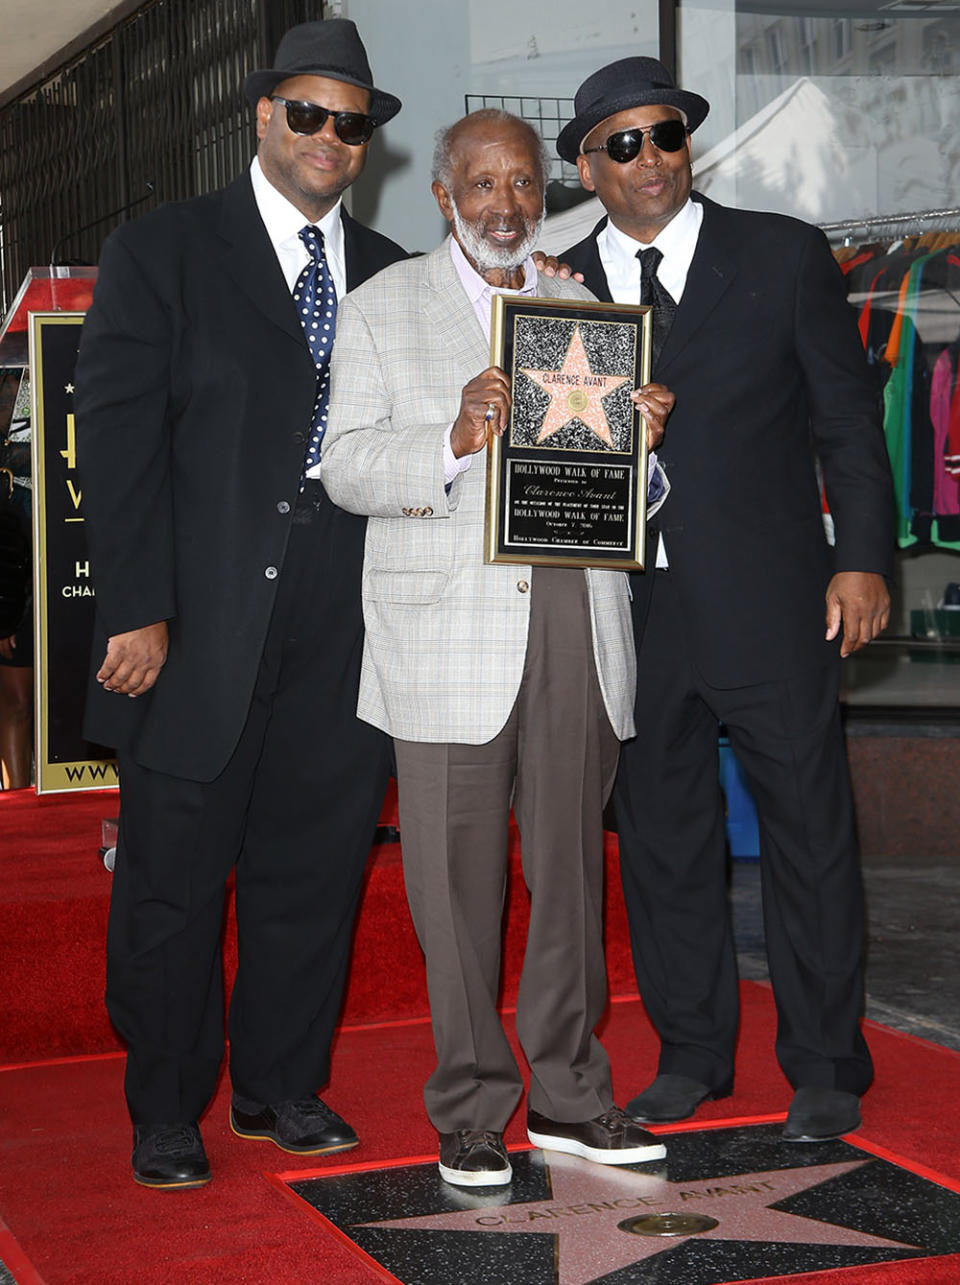 Jimmy Jam, Clarence Avant and Terry Lewis attend the ceremony honoring Clarence Avant with a Star on The Hollywood Walk of Fame held on October 7, 2016 in Hollywood, California.